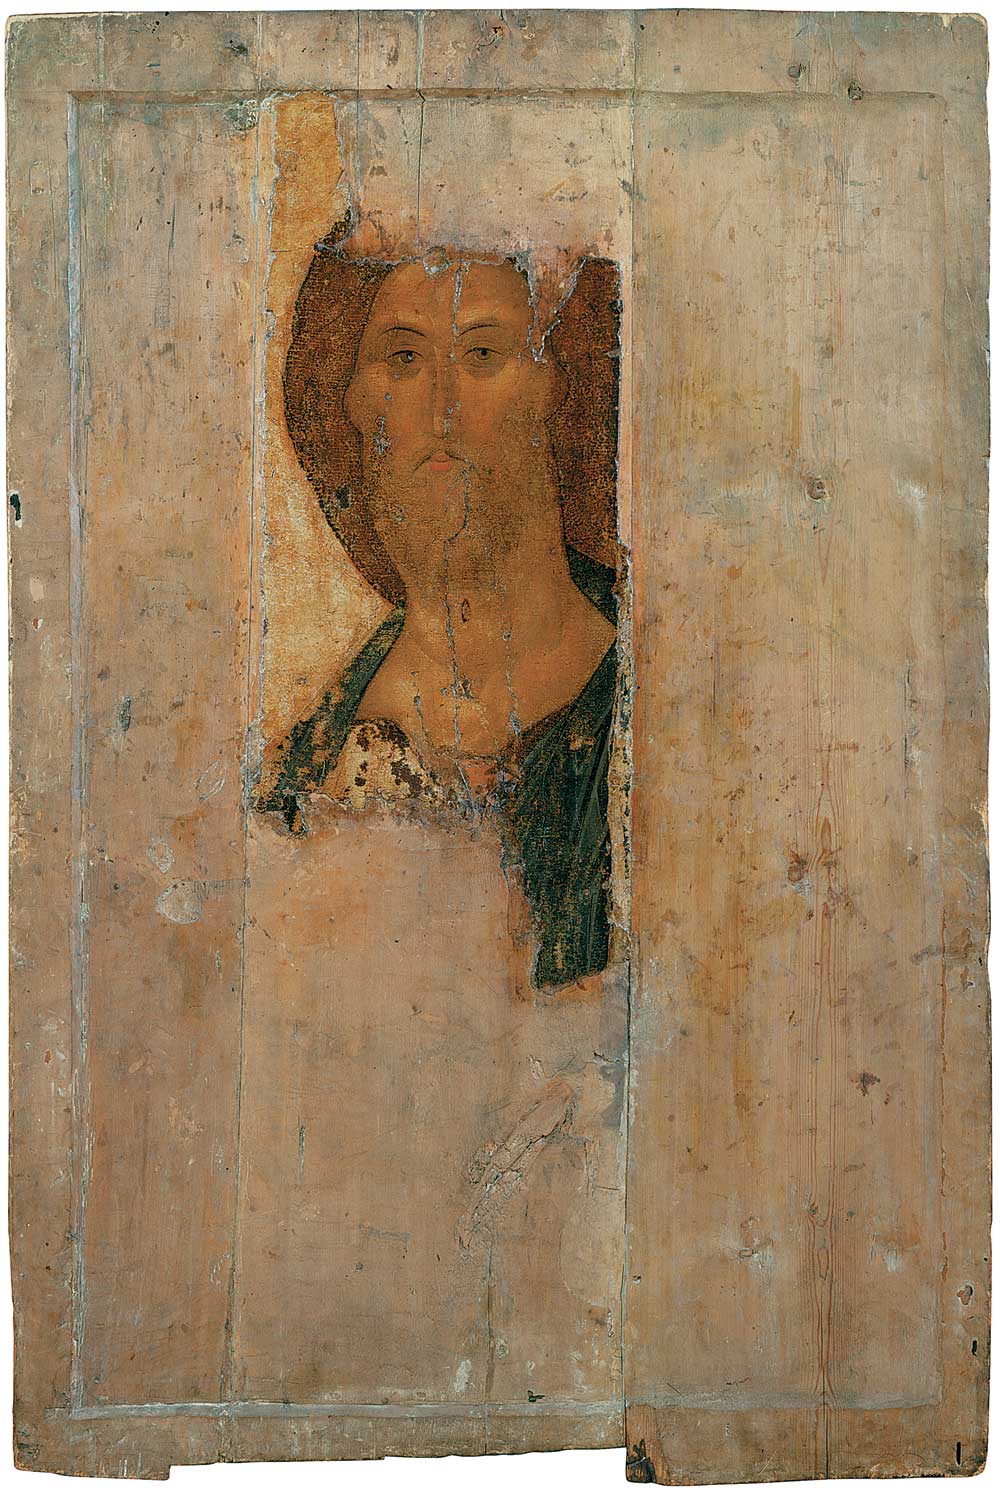 Andrei Rublev. The Saviour. The icon from the Deisus Chin (Row), of Assumption Cathedral on the Gorodok in Zvenigorod. State Tretyakov Gallery